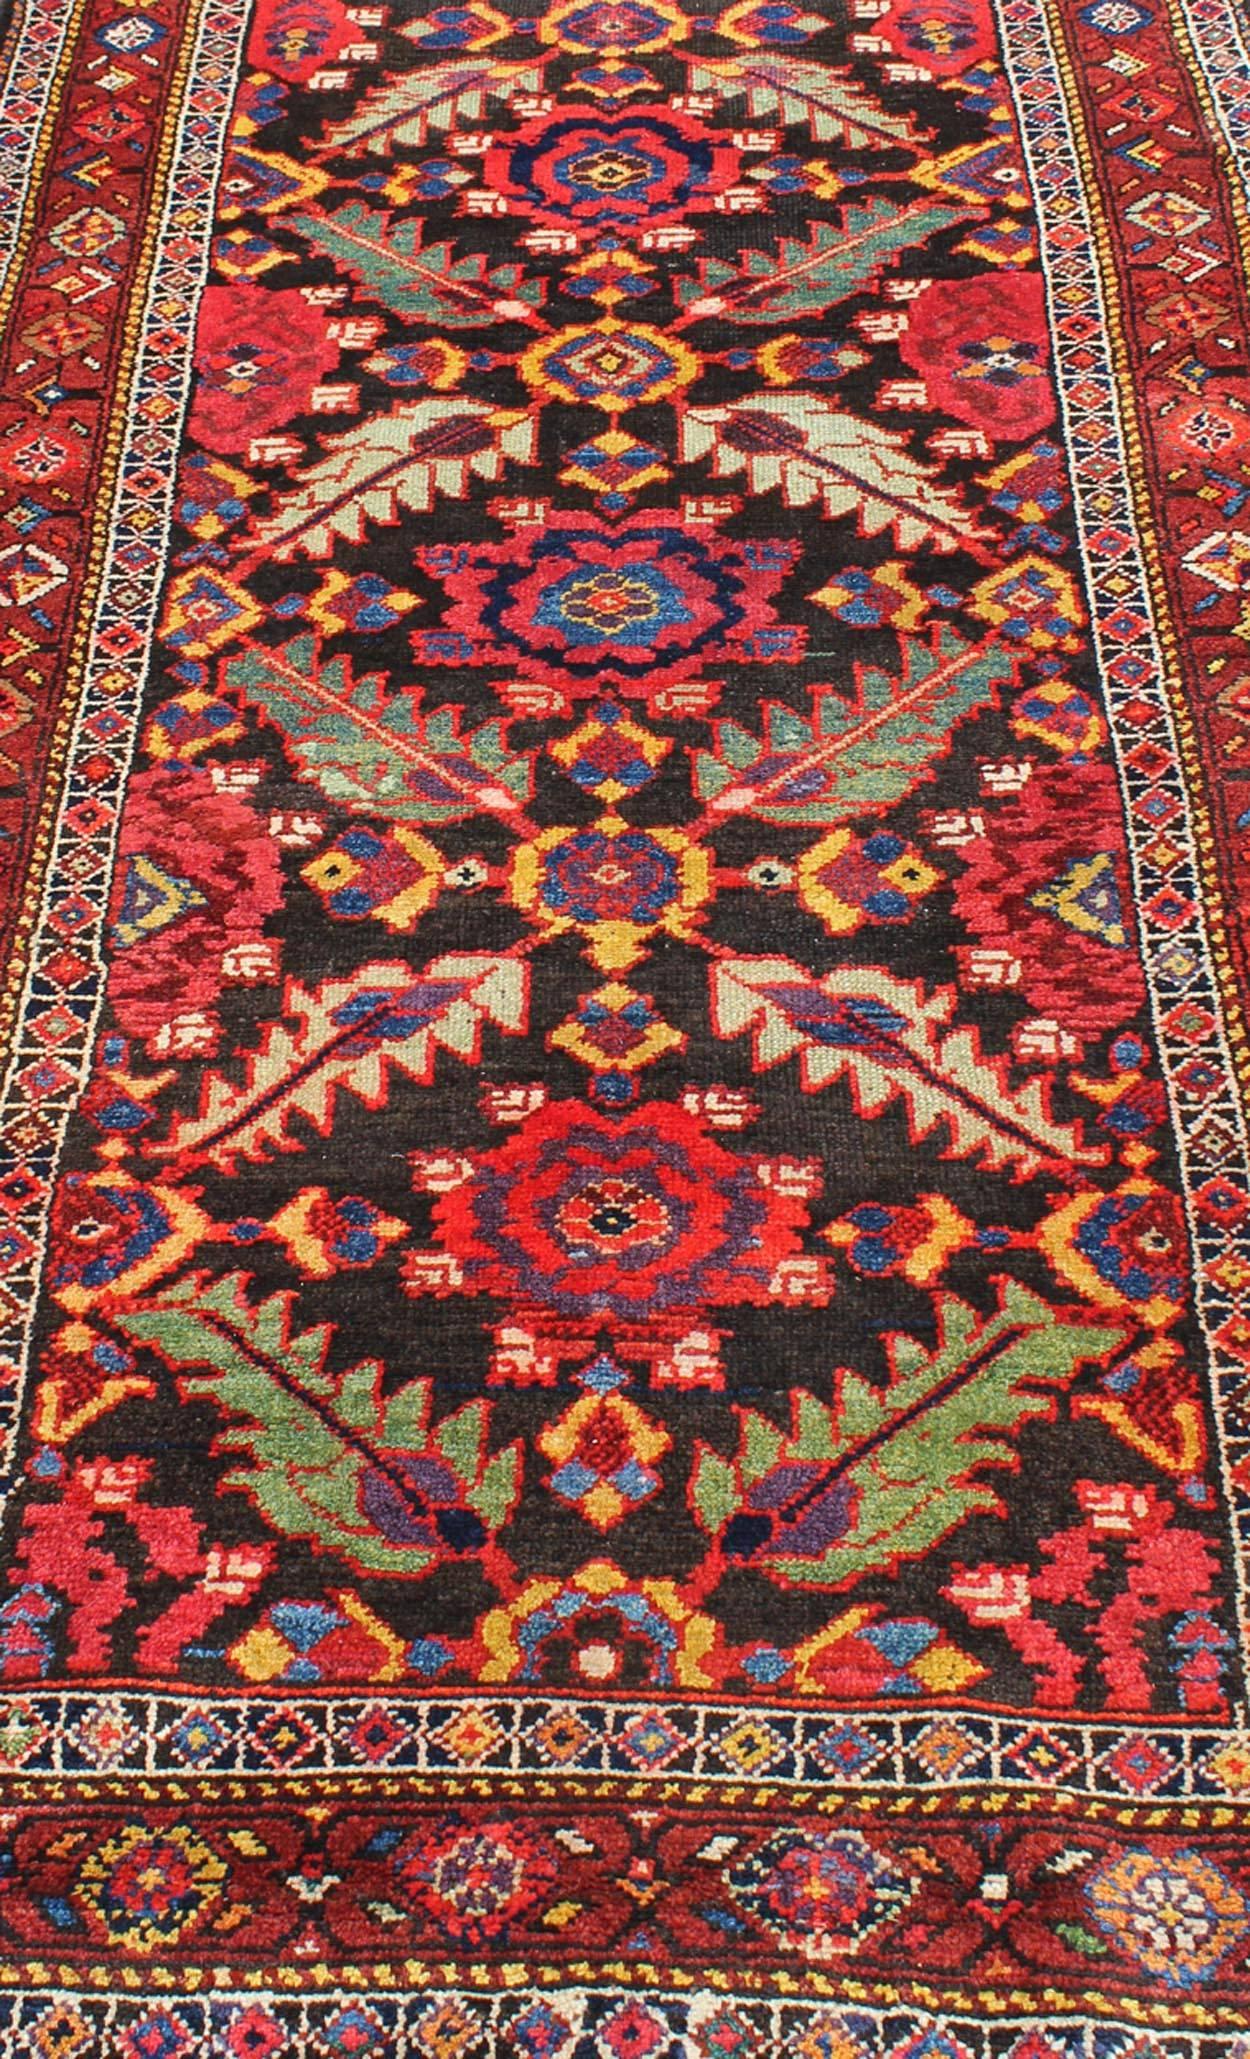 Colorful Jewel-Toned Antique Caucasian Karabagh Runner with Tribal Design For Sale 1